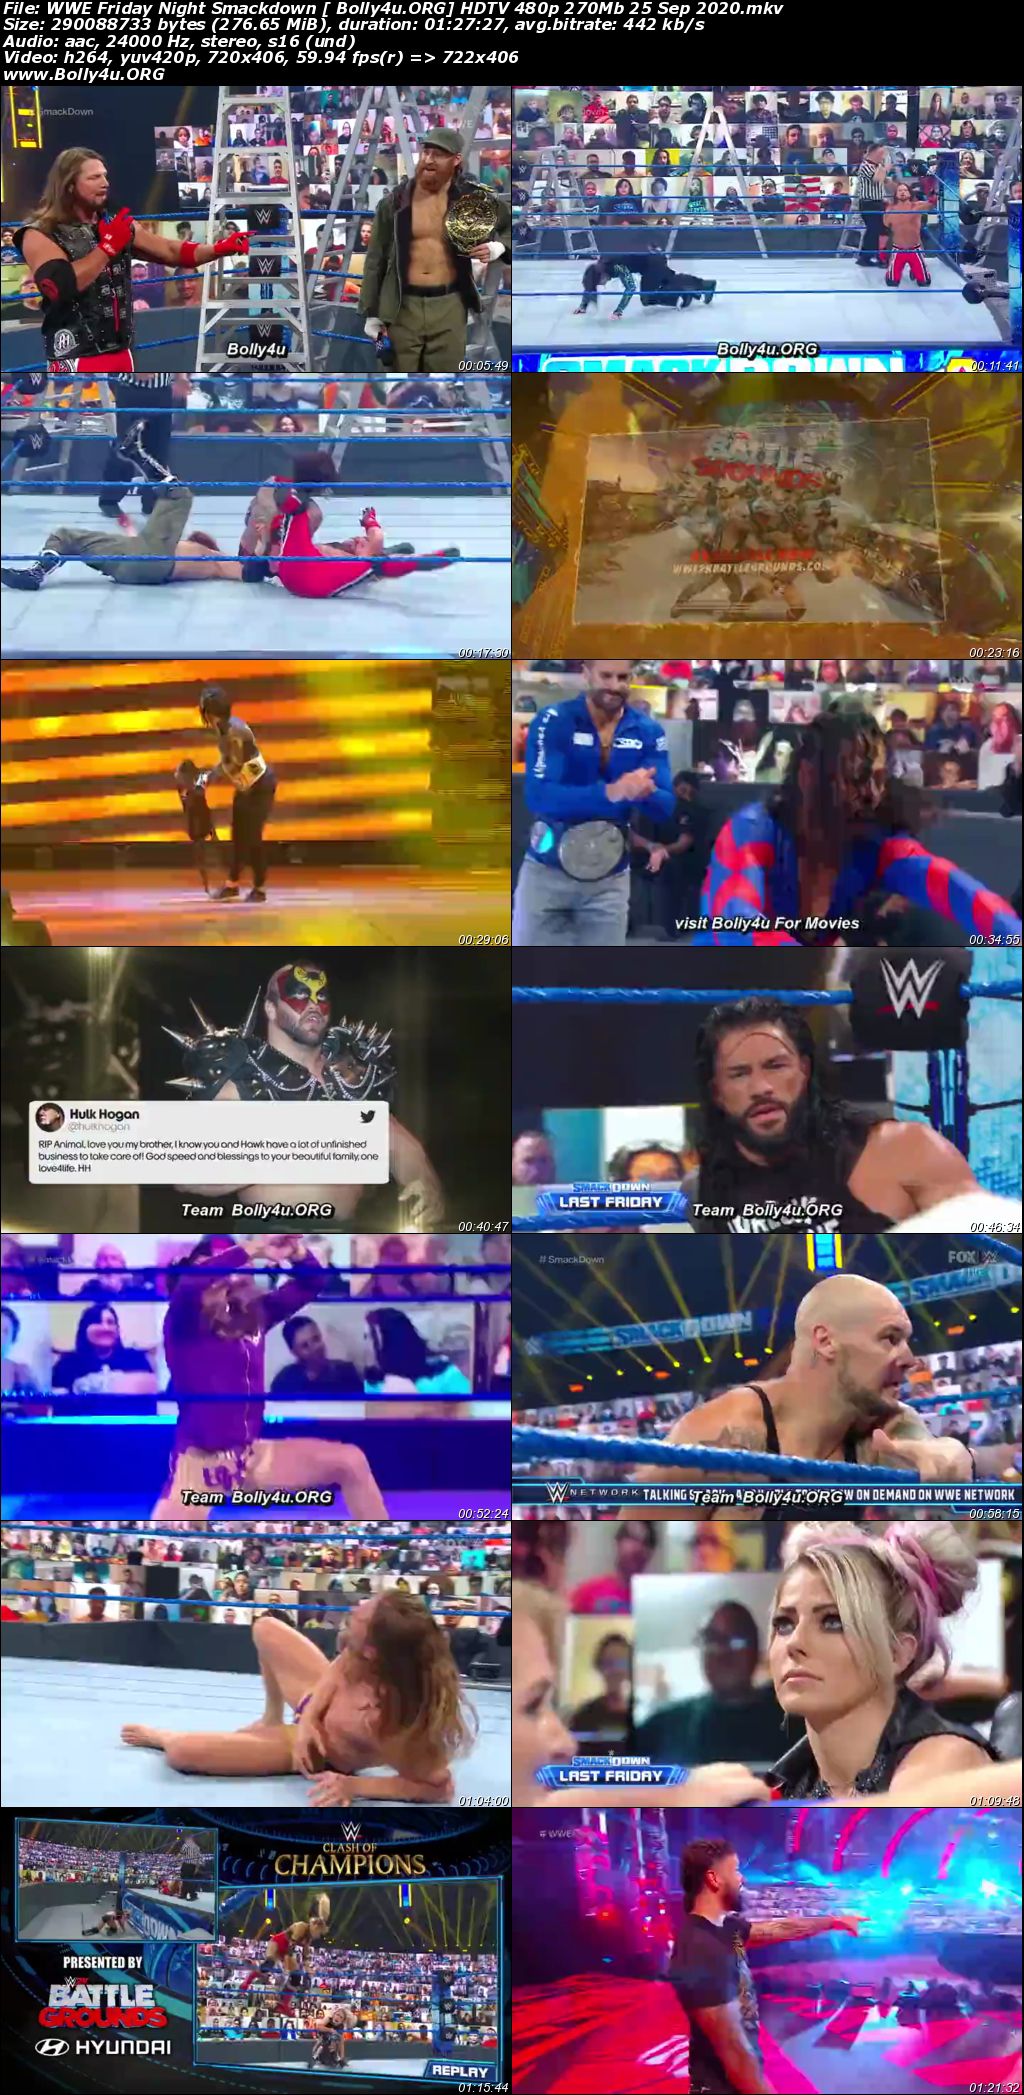 WWE Friday Night Smackdown HDTV 480p 270Mb 25 Sep 2020 Download